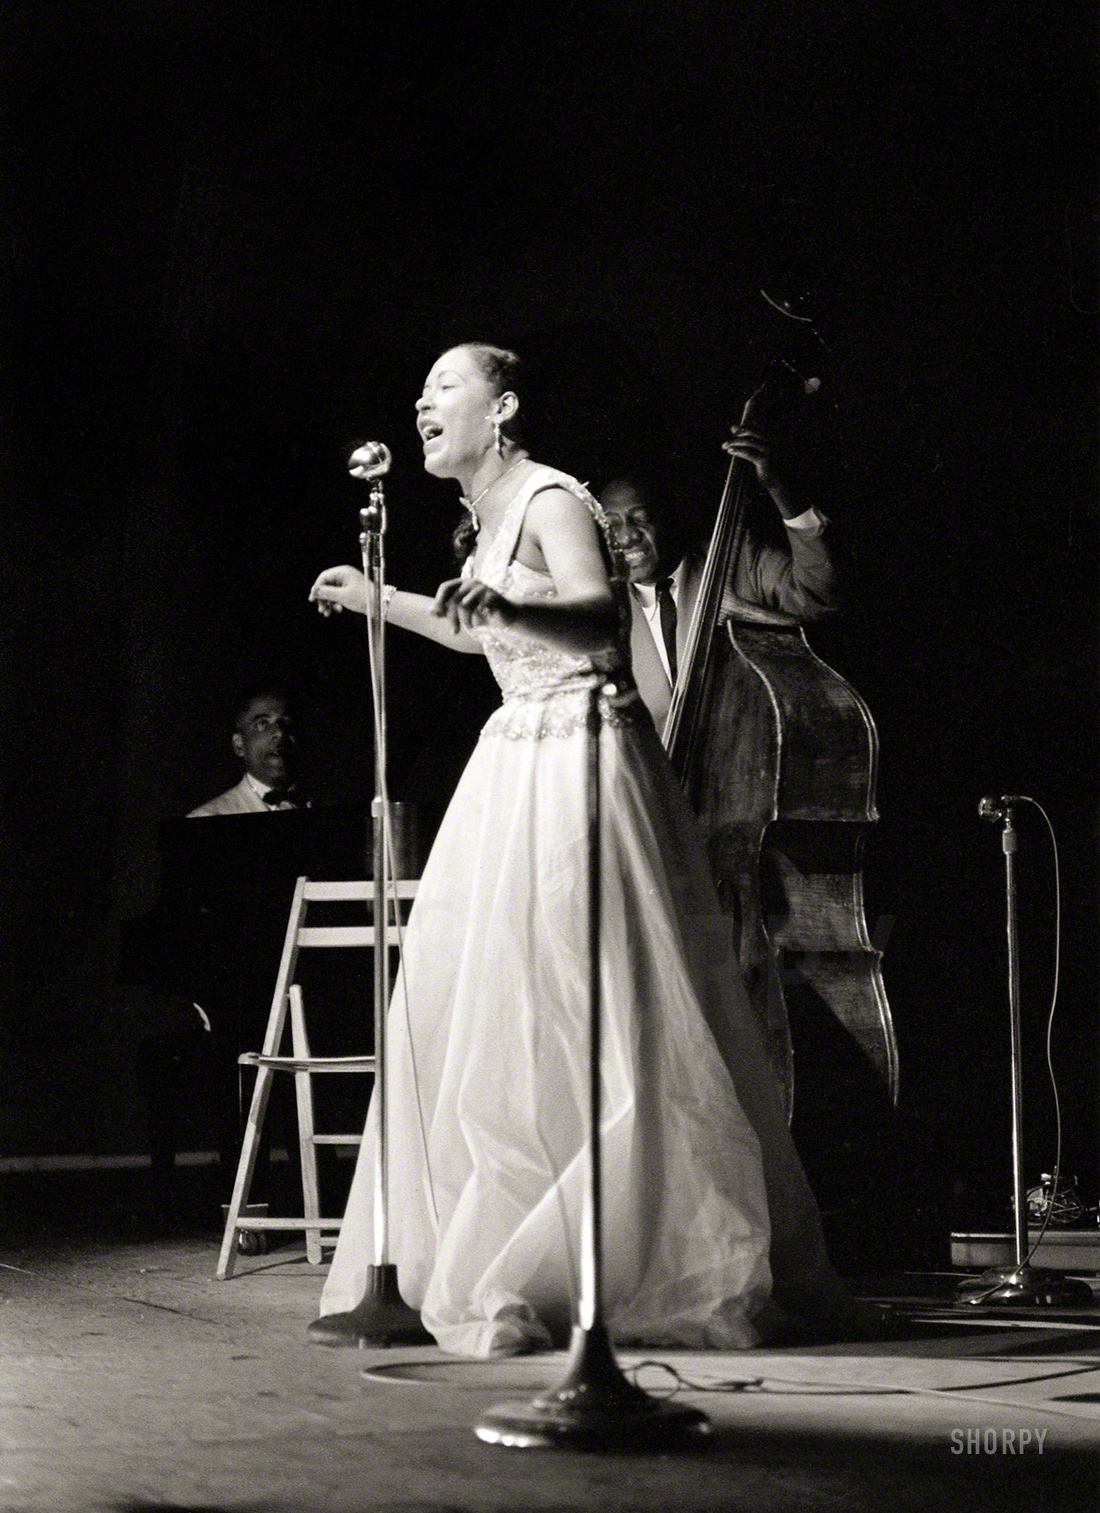 Billie Holiday, with Teddy Wilson at the piano and Milt Hinton on bass, at the Newport Jazz Festival in July 1954, five years from the close of her career and the end of her life. 35mm negative by John Vachon for Look magazine. (Caption updated thanks to our knowledgeable commenters.) View full size.